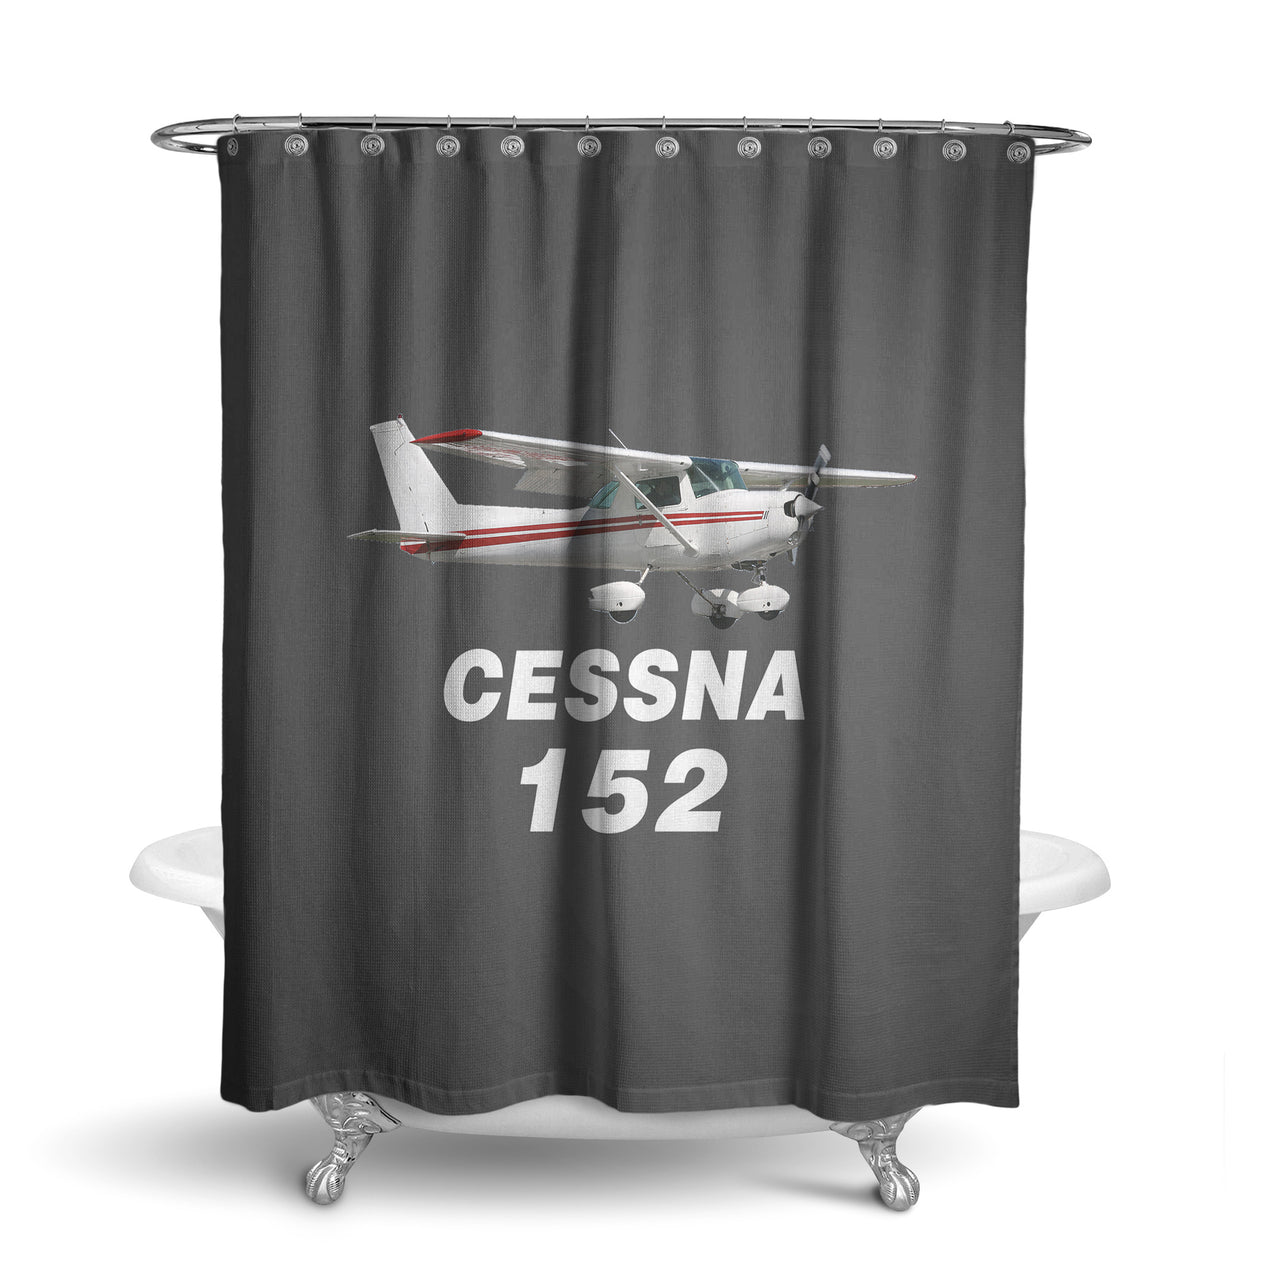 The Cessna 152 Designed Shower Curtains